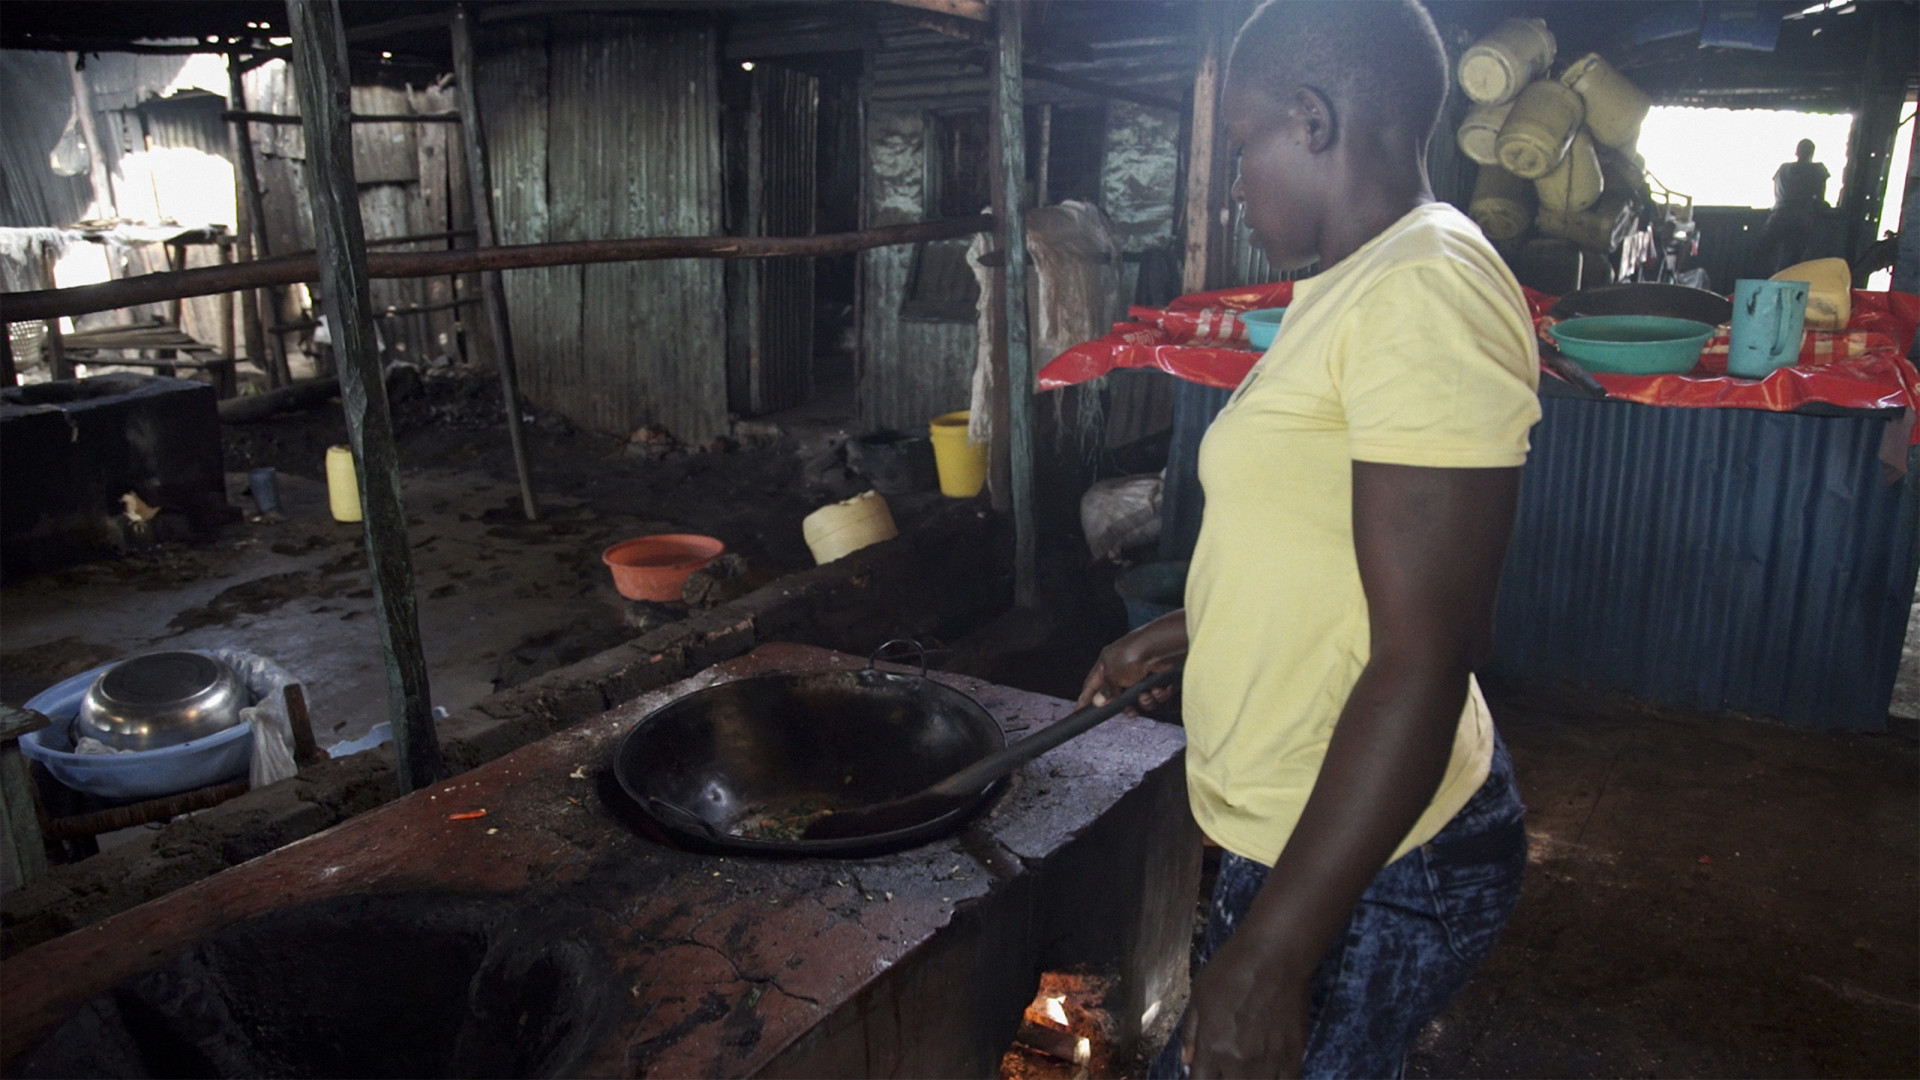 A cook prepares food in her restaurant on a recently installed rocket stove on the shores of Lake Victoria in Kisumu, Kenya. The rocket stoves are cleaner and more effiecient, allowing restaurants to expand and serve more customers. Photo: Petr Kapuscinski / World Bank